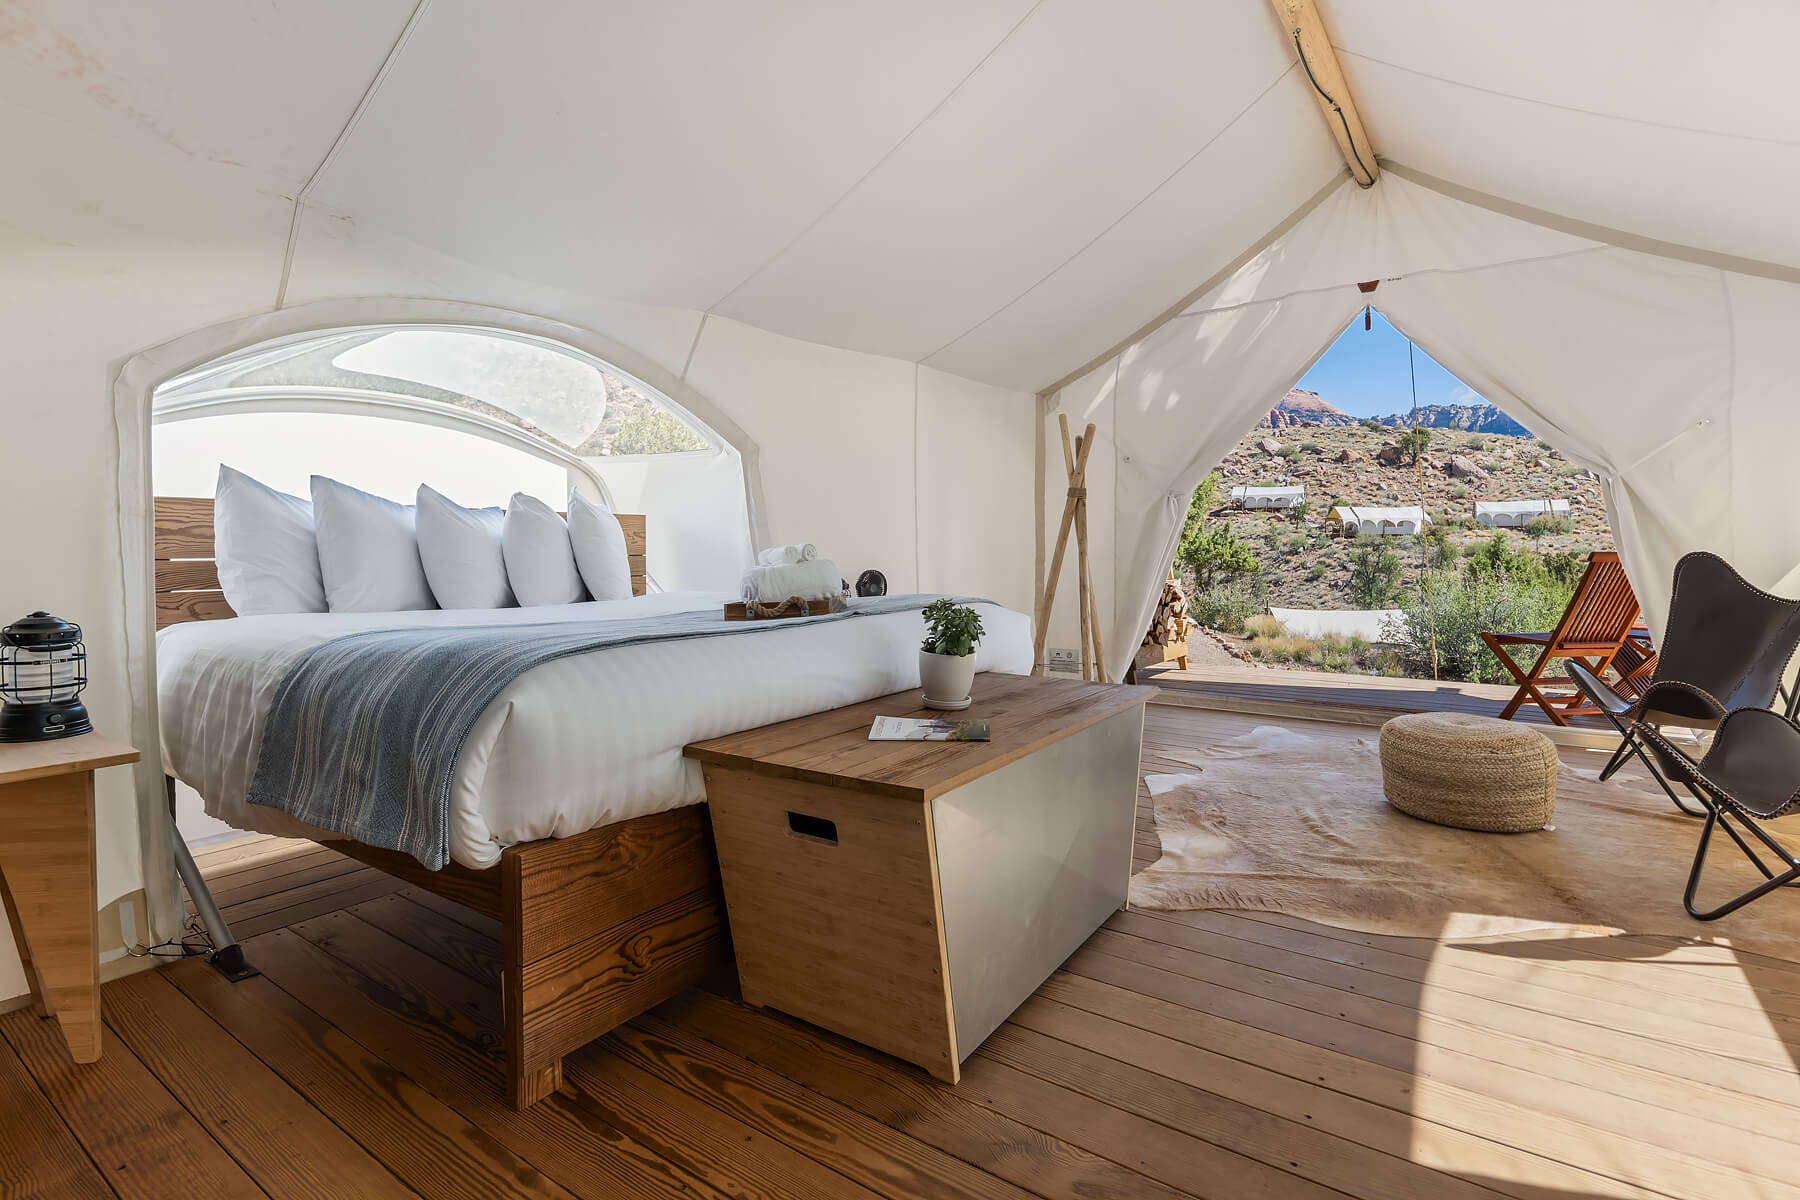 Inside a luxury white tent at Under Canvas glamping style Virgin UT hotel with bed, ottoman and chairs leading to deck with a view